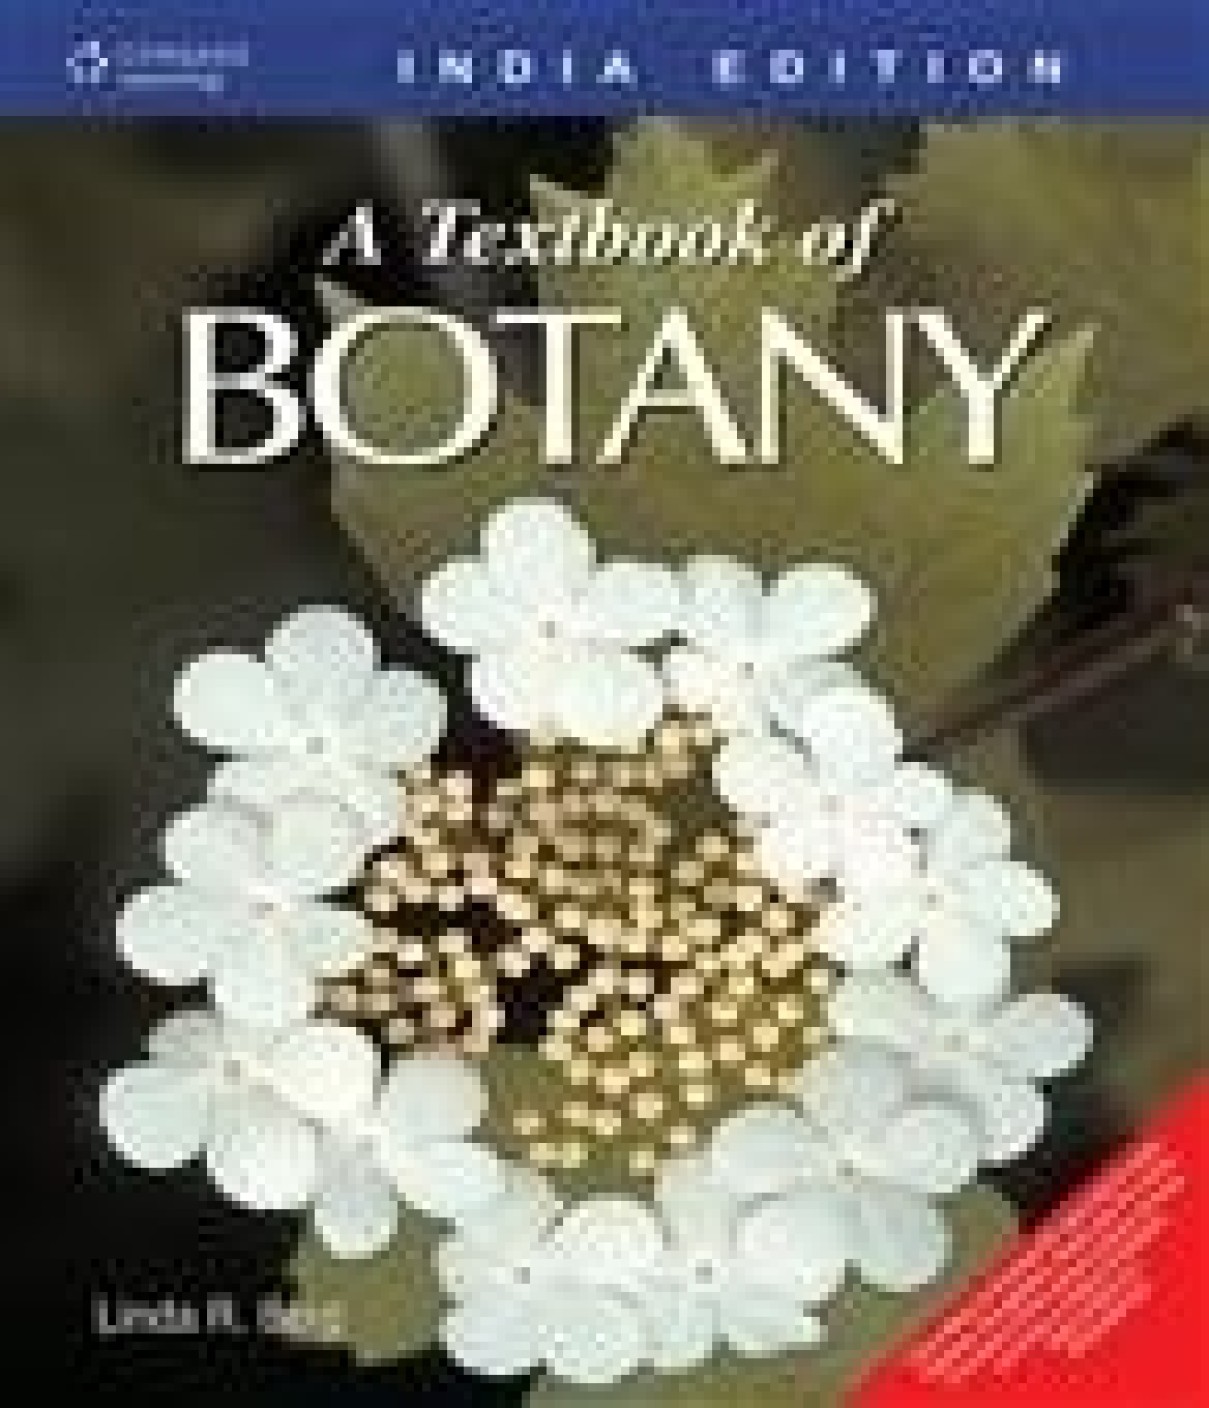 best topics for research in botany